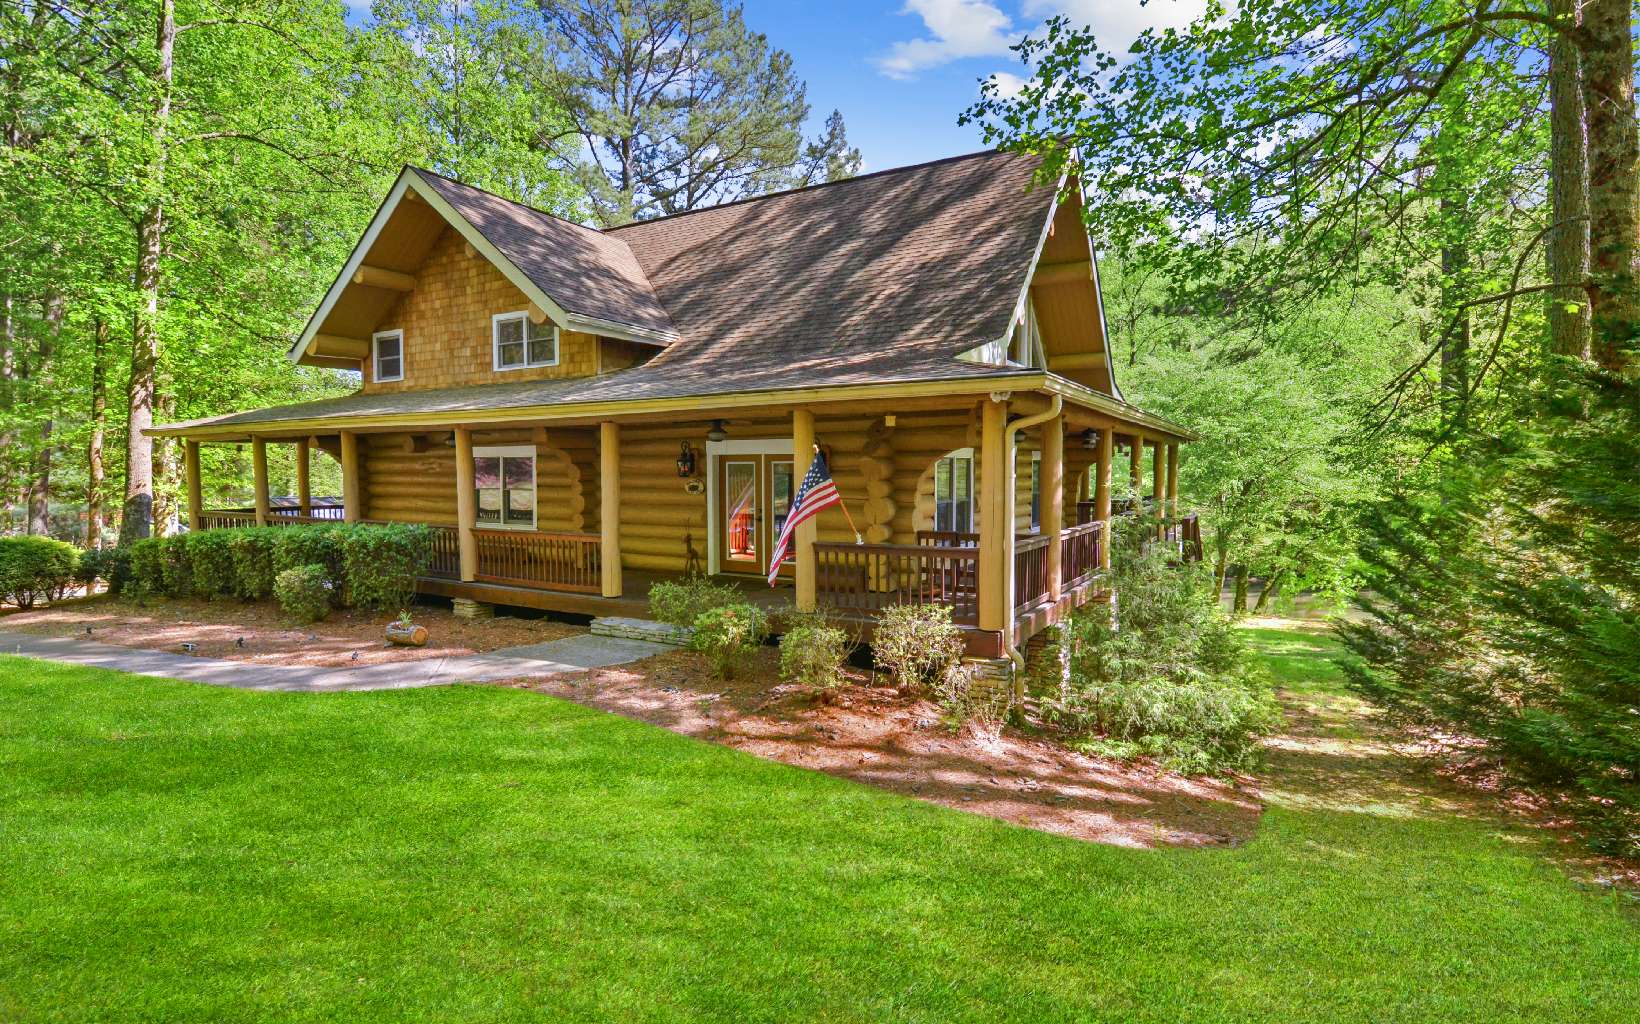 Welcome to this stunning true Canadian log cabin nestled on the Coosawattee River—a rare find with a flat lot on this highly desired river. Prepare to be captivated as you enjoy the sights and sounds of the rapids from the wrap-around porch or relax on the spacious deck by the water's edge. Every detail in this intricately decorated 5-bedroom, 4-bathroom home has been carefully considered, and it is being sold mostly furnished for your convenience. Step inside and be greeted by soaring ceilings, a two-story wall of windows, and a magnificent stacked stone fireplace. The real hardwood floors, granite countertops, and custom cream cabinetry in the well-appointed kitchen add a touch of elegance. Equipped with stainless steel appliances and a wine cooler, this kitchen is a dream for any culinary enthusiast. The large master bedroom on the main floor boasts a walk-in closet, an in-shower tower, a tiled shower, and a beautiful tile floor. Upstairs, you'll discover an additional master suite, two guest rooms, and two bathrooms. The second master suite features hardwood floors, high ceilings, a spacious master bathroom with his and hers sinks, tiled floors, a Jacuzzi tub, and a tiled shower. The finished terrace level offers a mini bar for entertaining, a pool table, a movie room, a fifth bedroom, and a fourth bathroom. For added convenience, there are laundry hookups on both the main and terrace levels. Recent improvements include an updated shower upstairs, new paint throughout, st